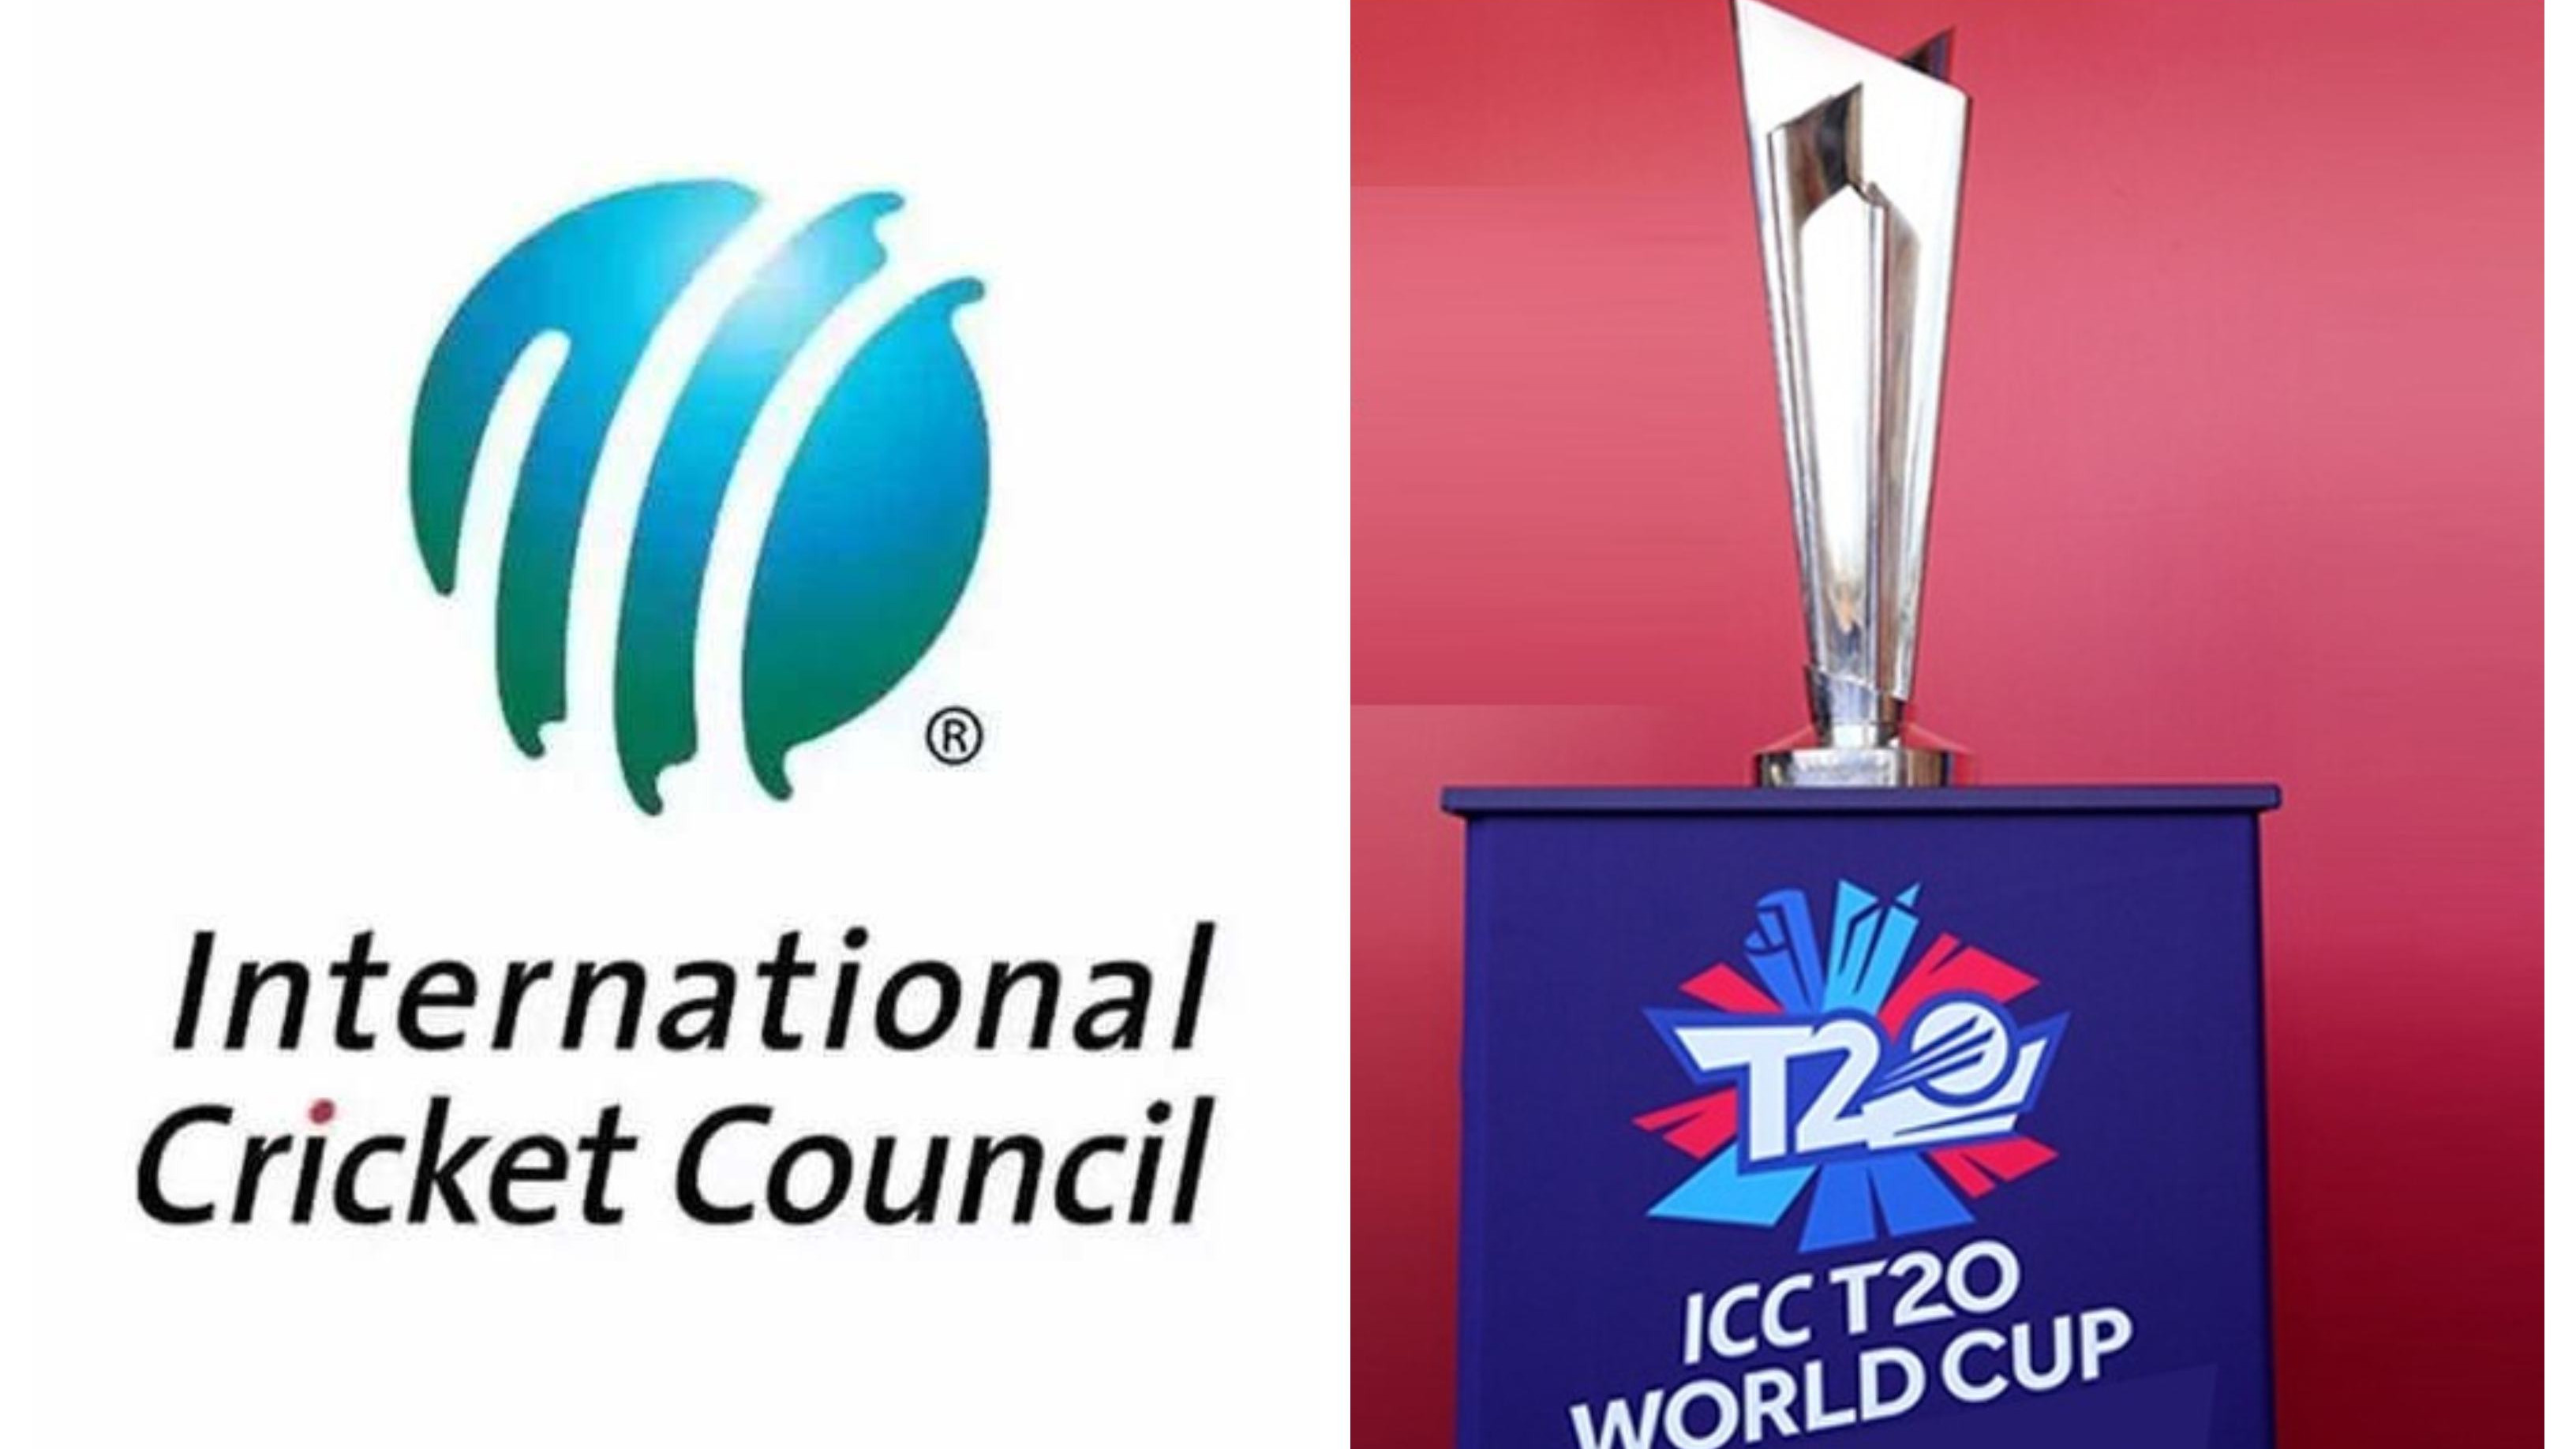 T20 World Cup 2021: COVID-19 committee to decide fate of matches if positive cases emerge, says ICC